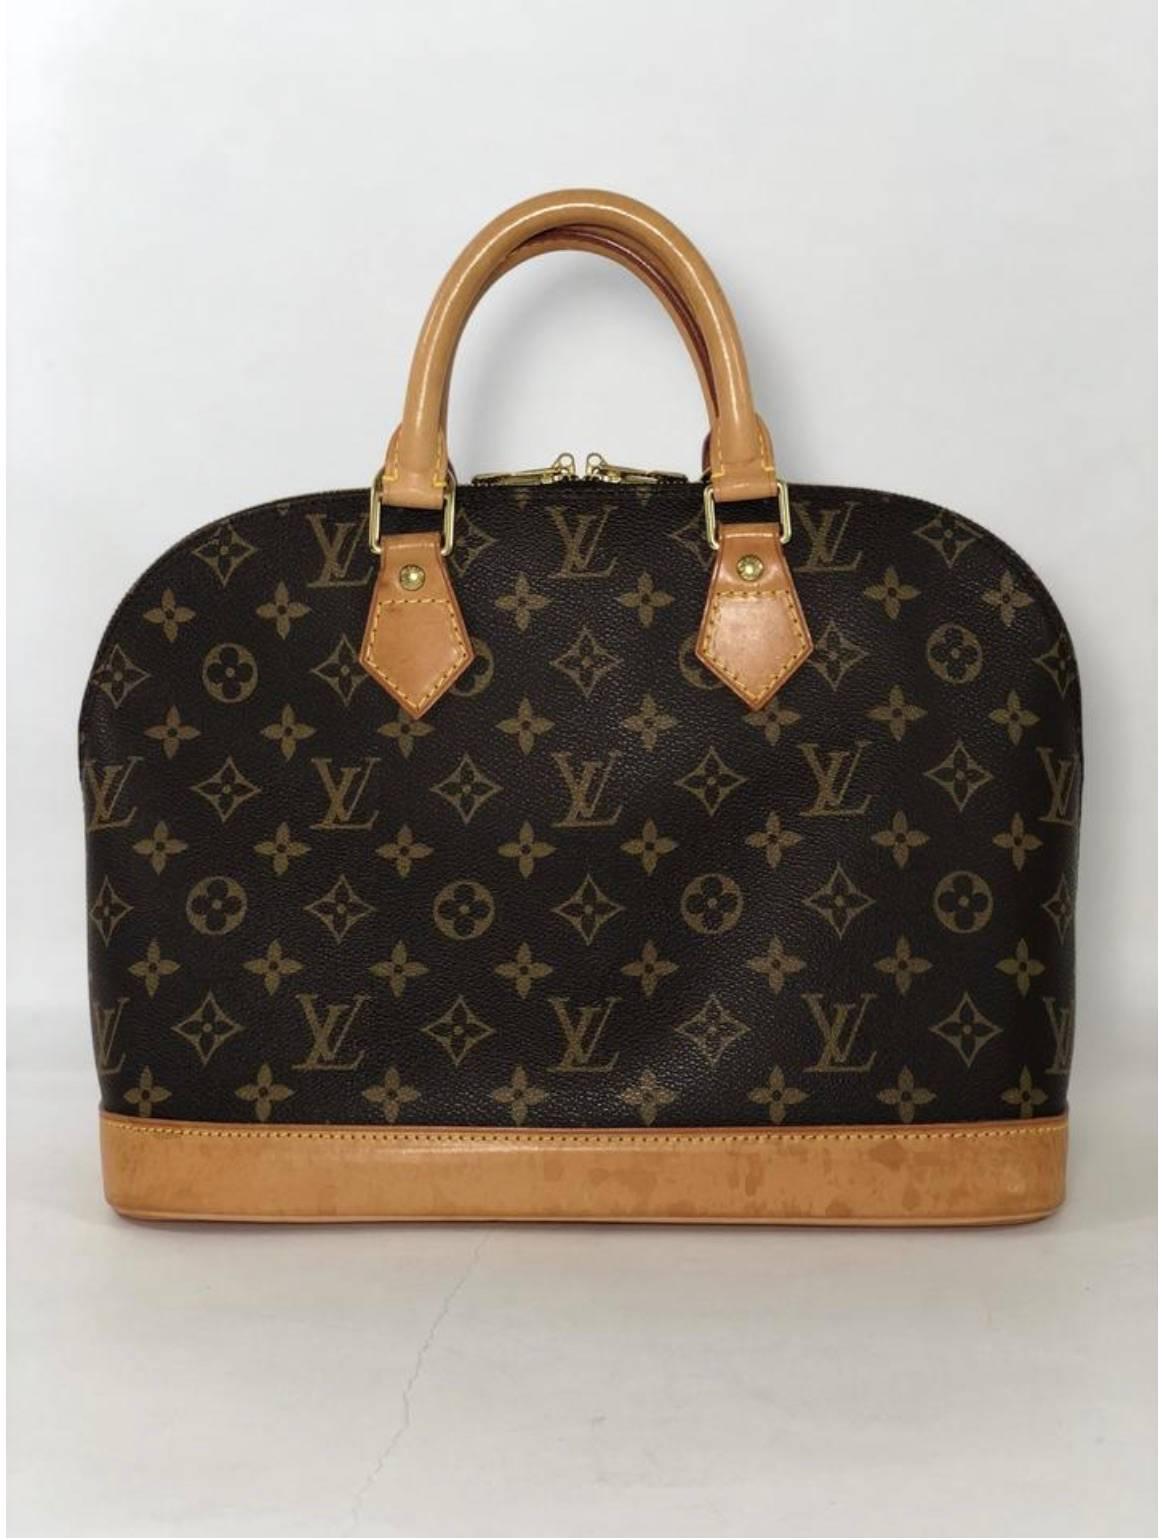 Louis Vuitton Monogram Alma PM Top Handle Bag In Good Condition For Sale In Saint Charles, IL